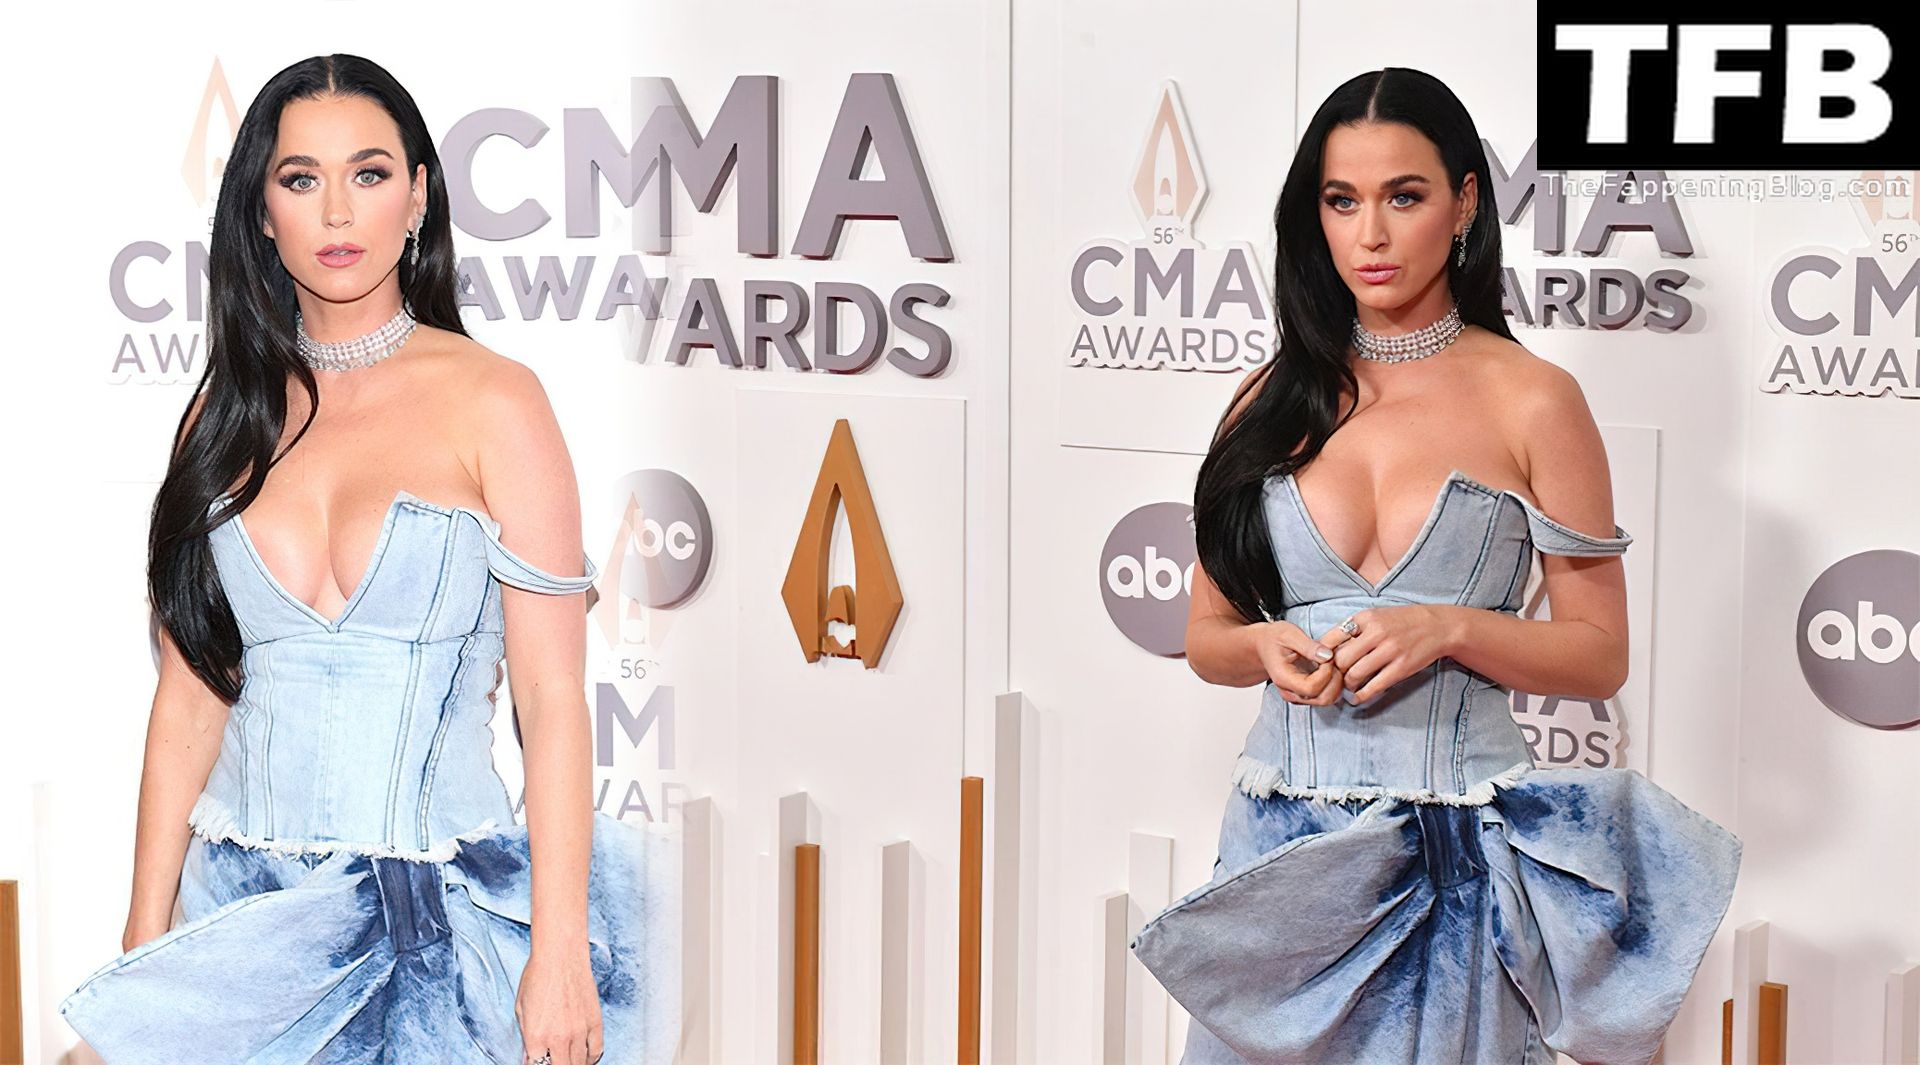 Katy Perry Gorgeous Boobs in Cleavage 1 thefappeningblog.com  - Katy Perry Shows Off Her Sexy Boobs at the 56th Annual CMA Awards (27 Photos)